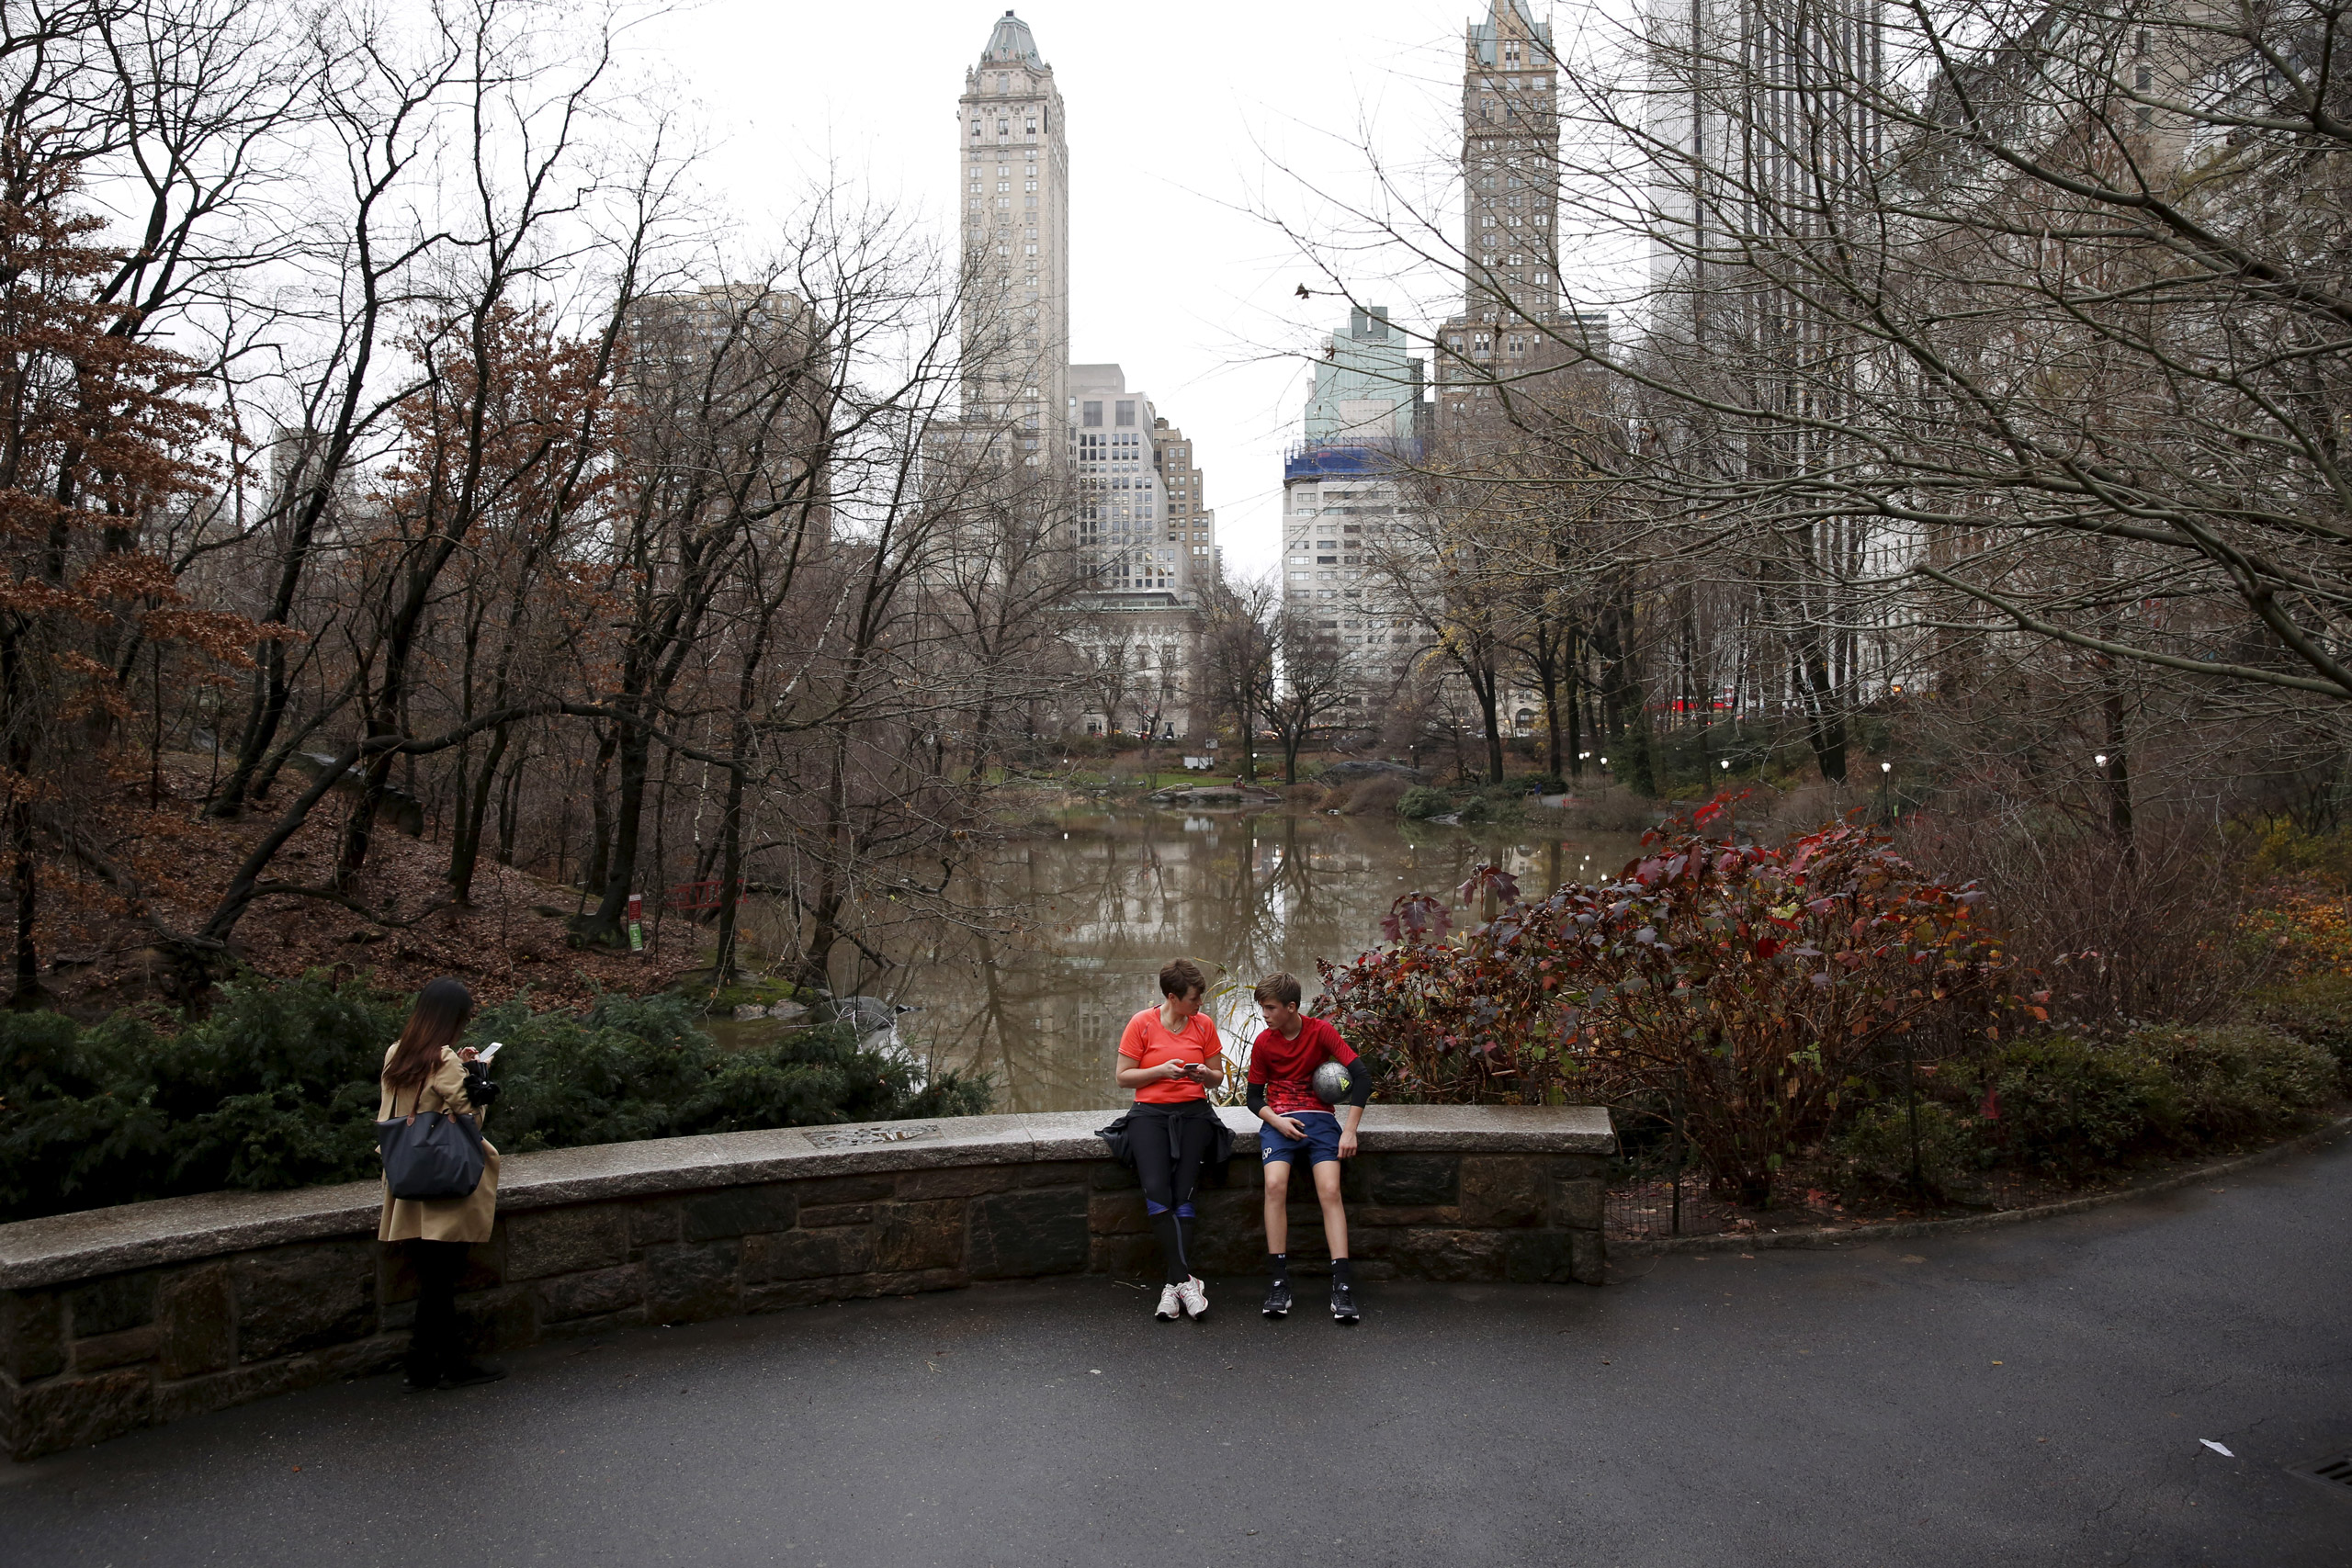 People sit to rest in Central Park during an unseasonably warm day in New York December 24, 2015. REUTERS/Lucas Jackson - RTX2005Q